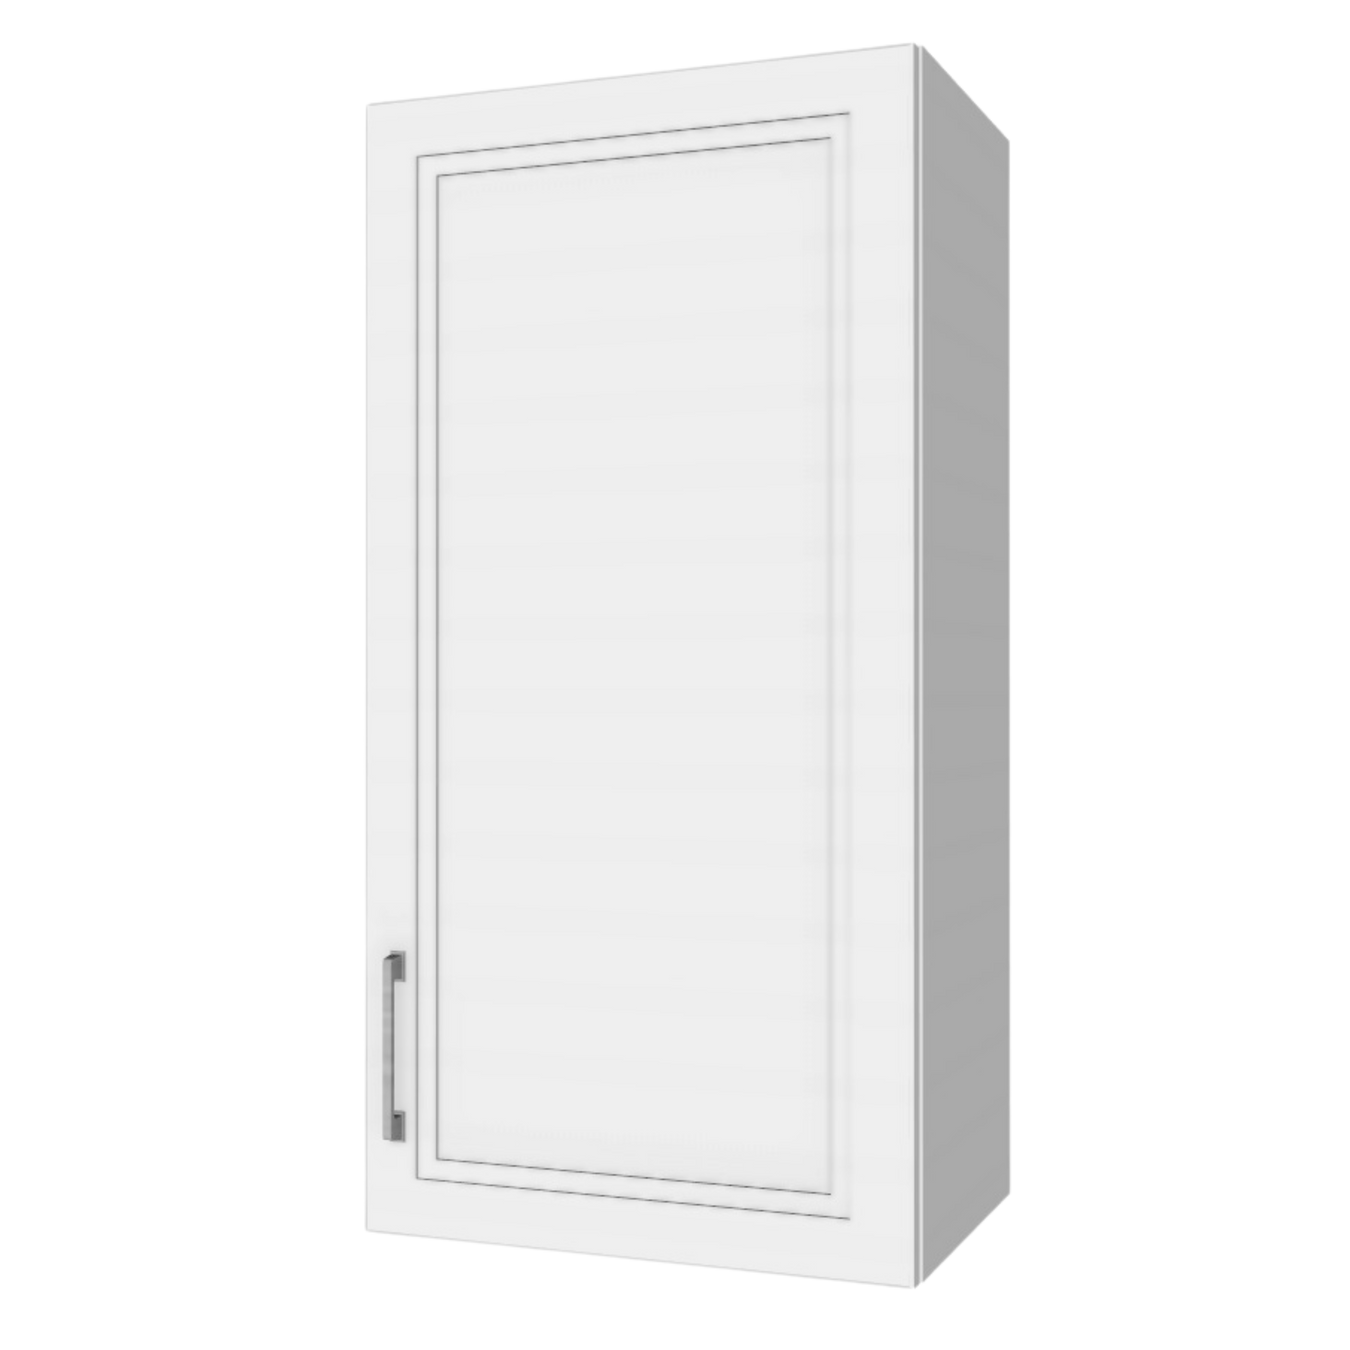 36" High Wall Cabinets - Painted Doors